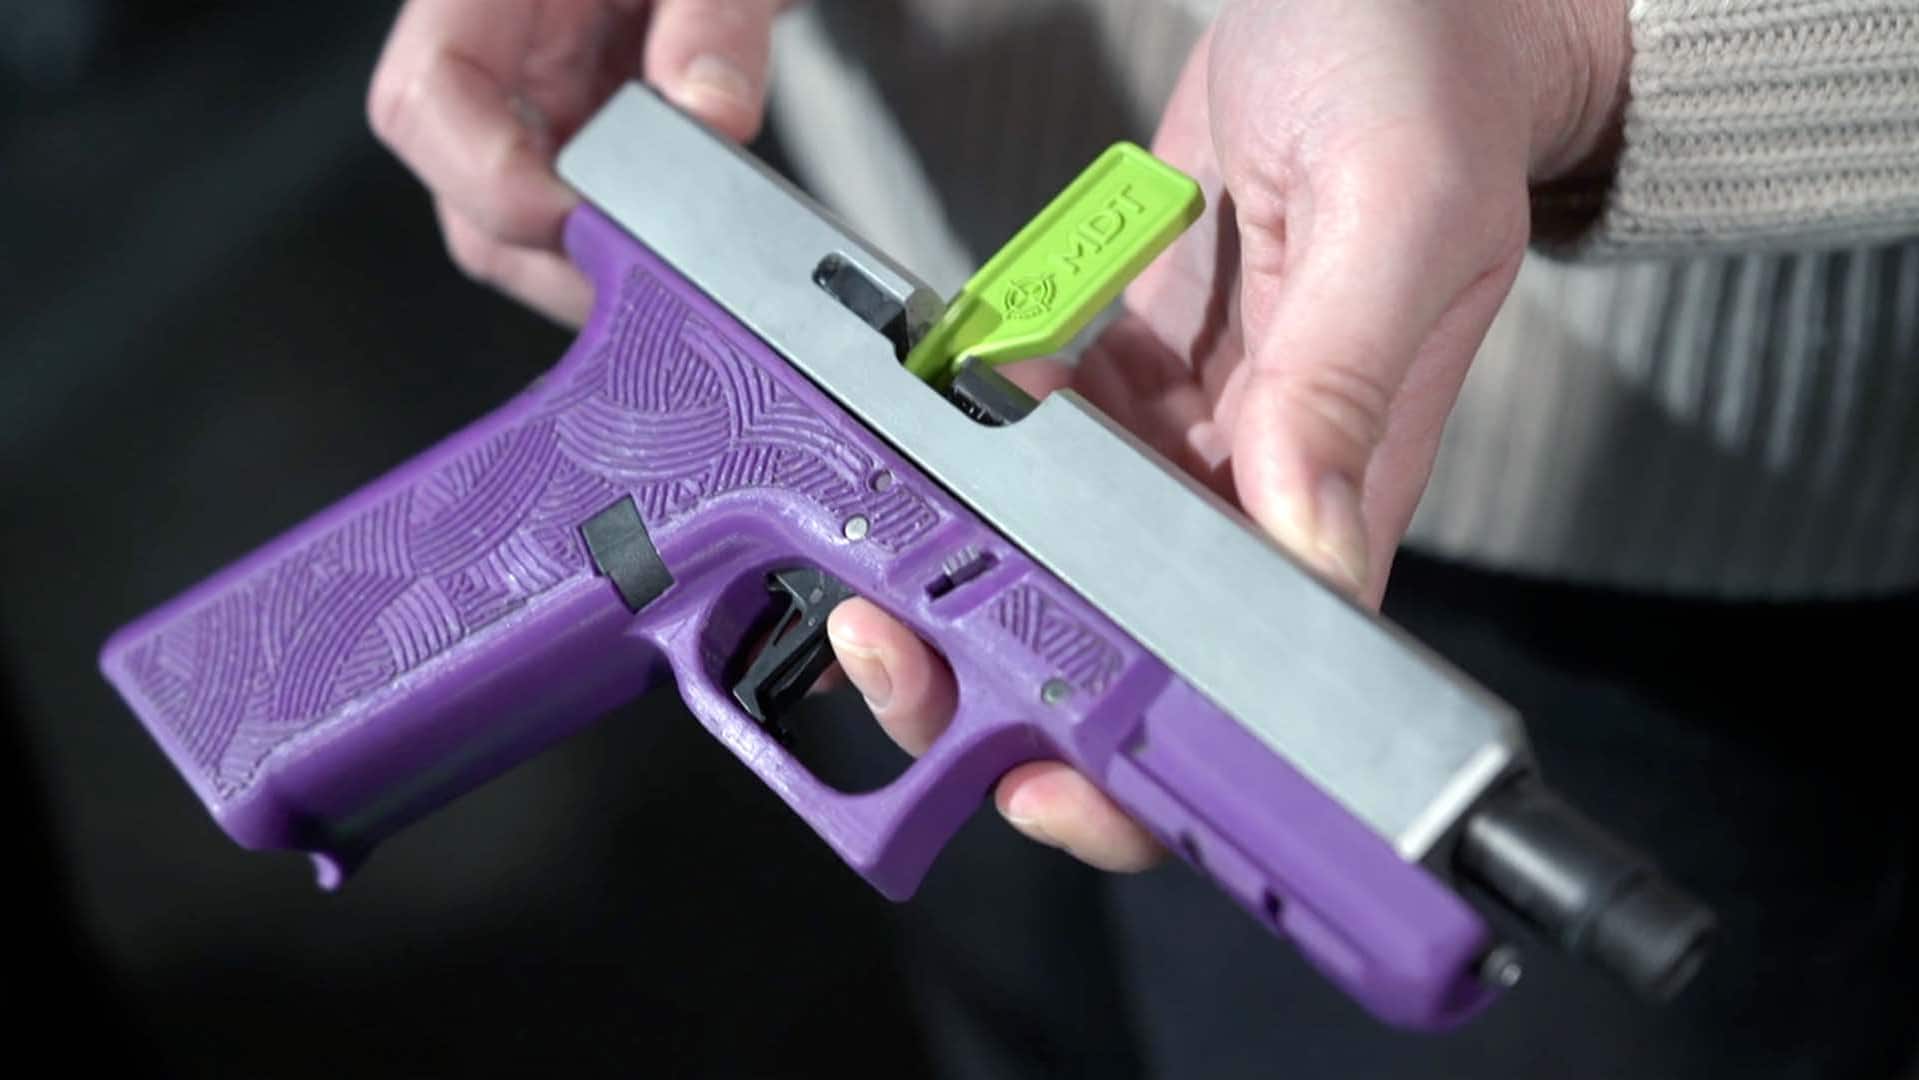 untraceable 3d printed ghost guns on the rise in canada 2